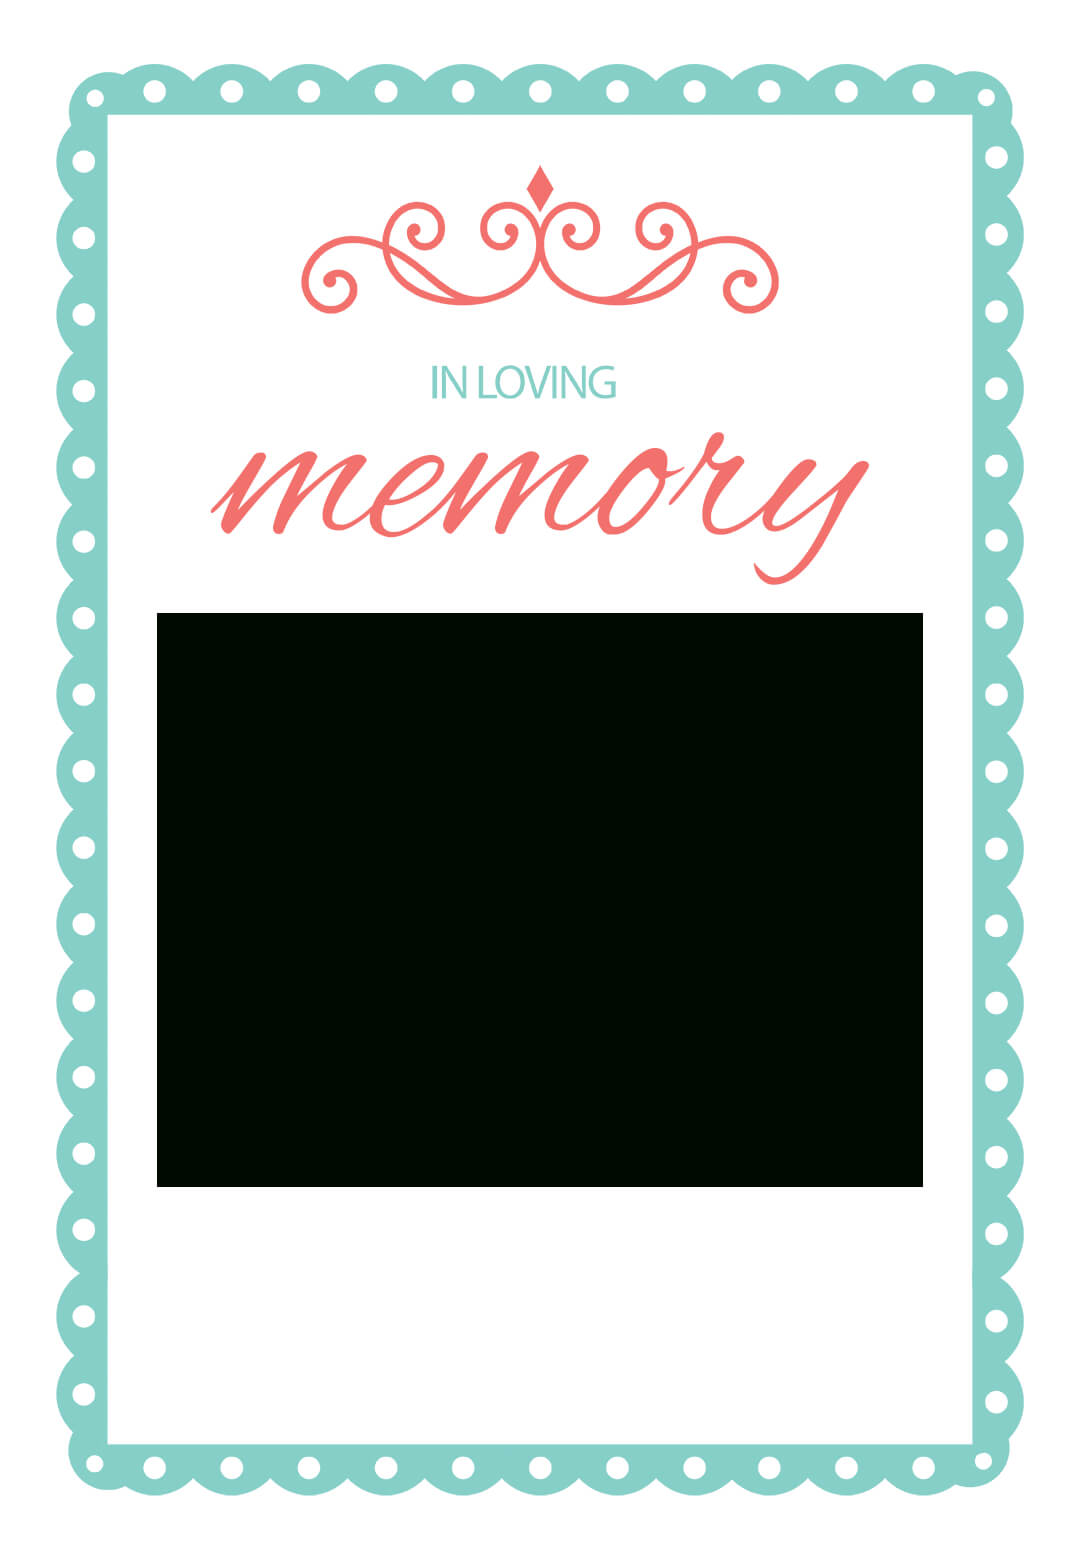 002 Free Memorial Cards Template Awful Ideas Card Word Intended For Remembrance Cards Template Free